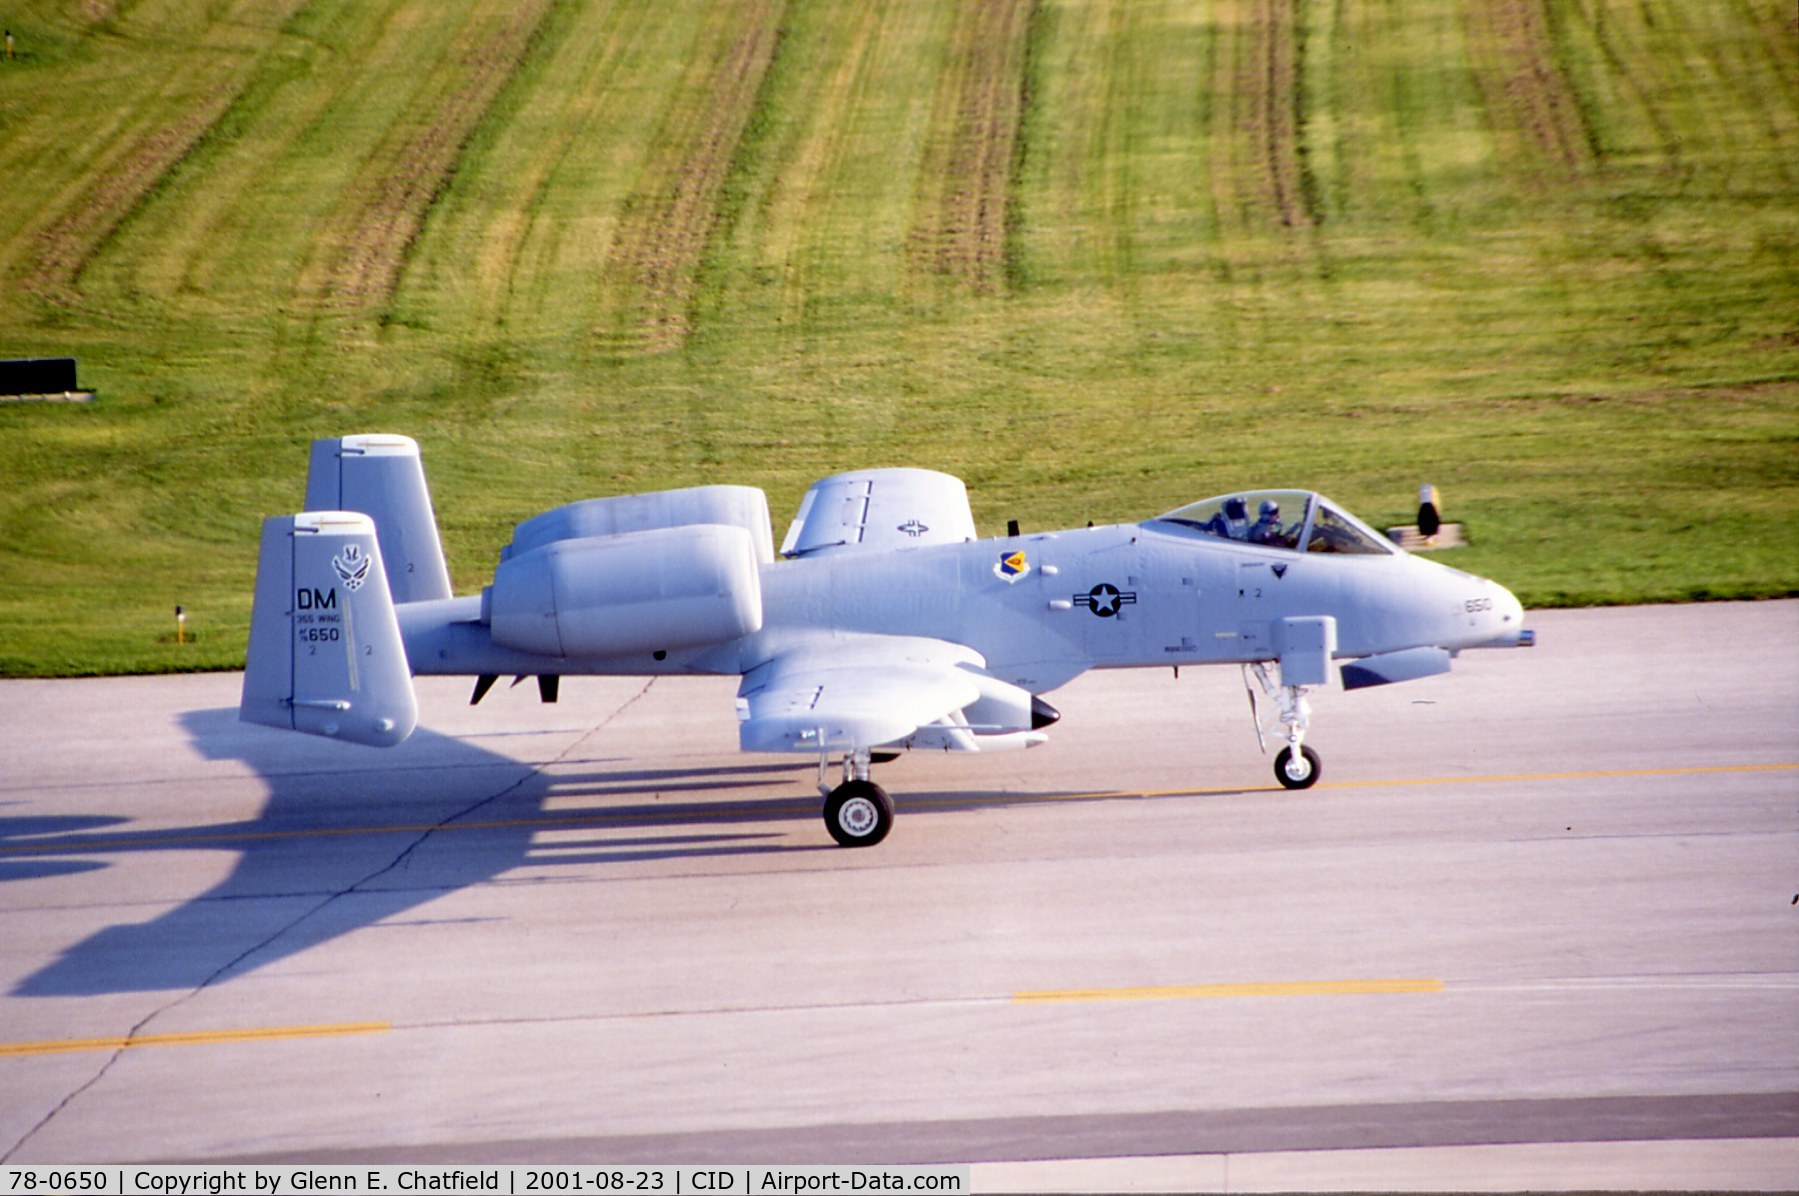 78-0650, 1978 Fairchild Republic A-10A Thunderbolt II C/N A10-0270, A-10A taxiing by the control tower